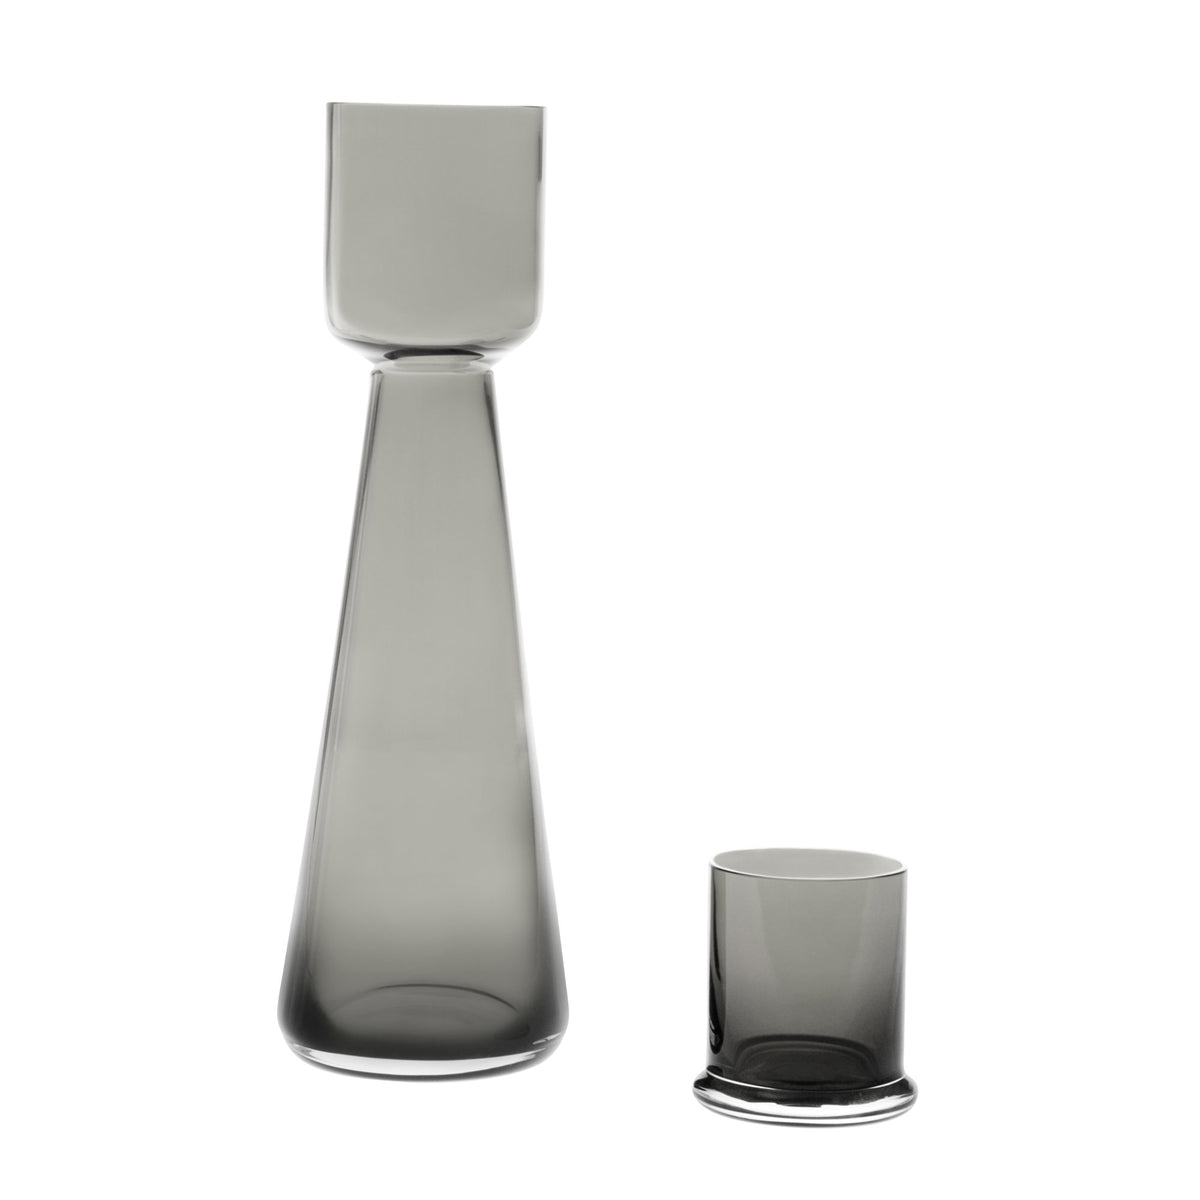 Monja Decanter and Tumbler Set - Neutral Gray